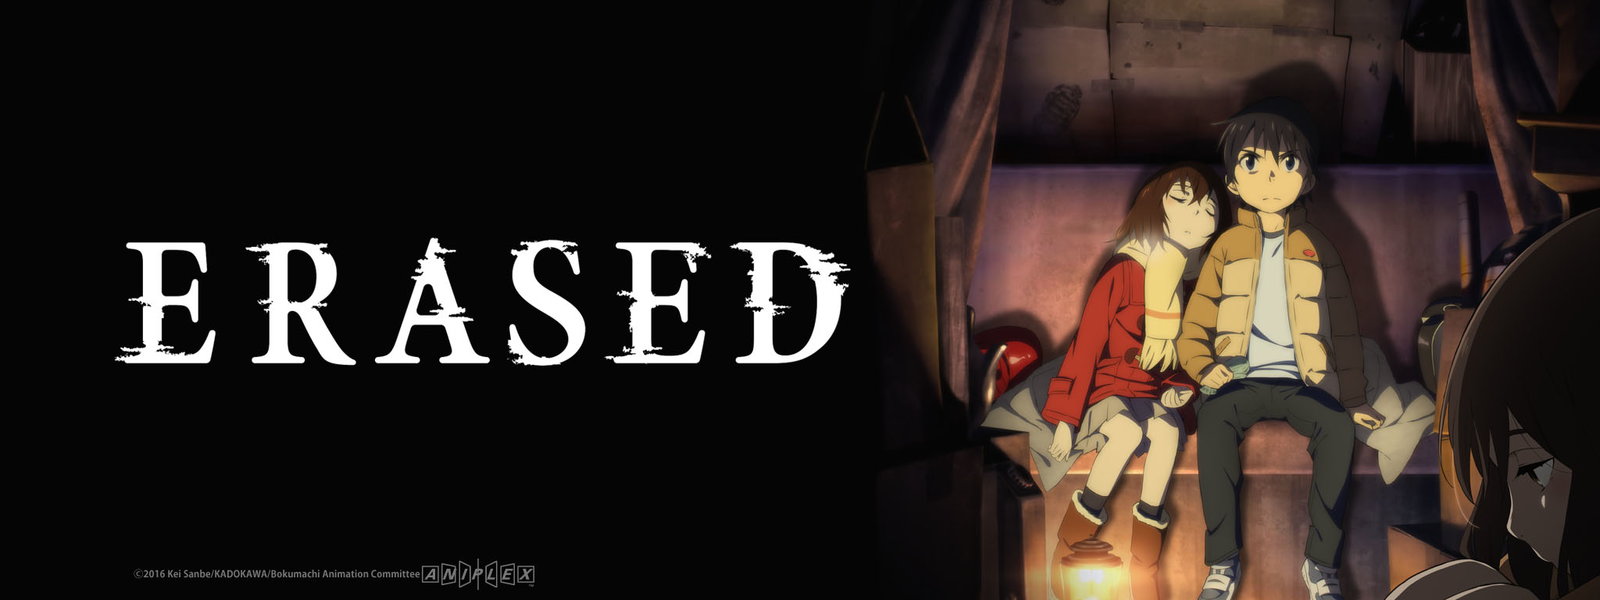 Erased Review